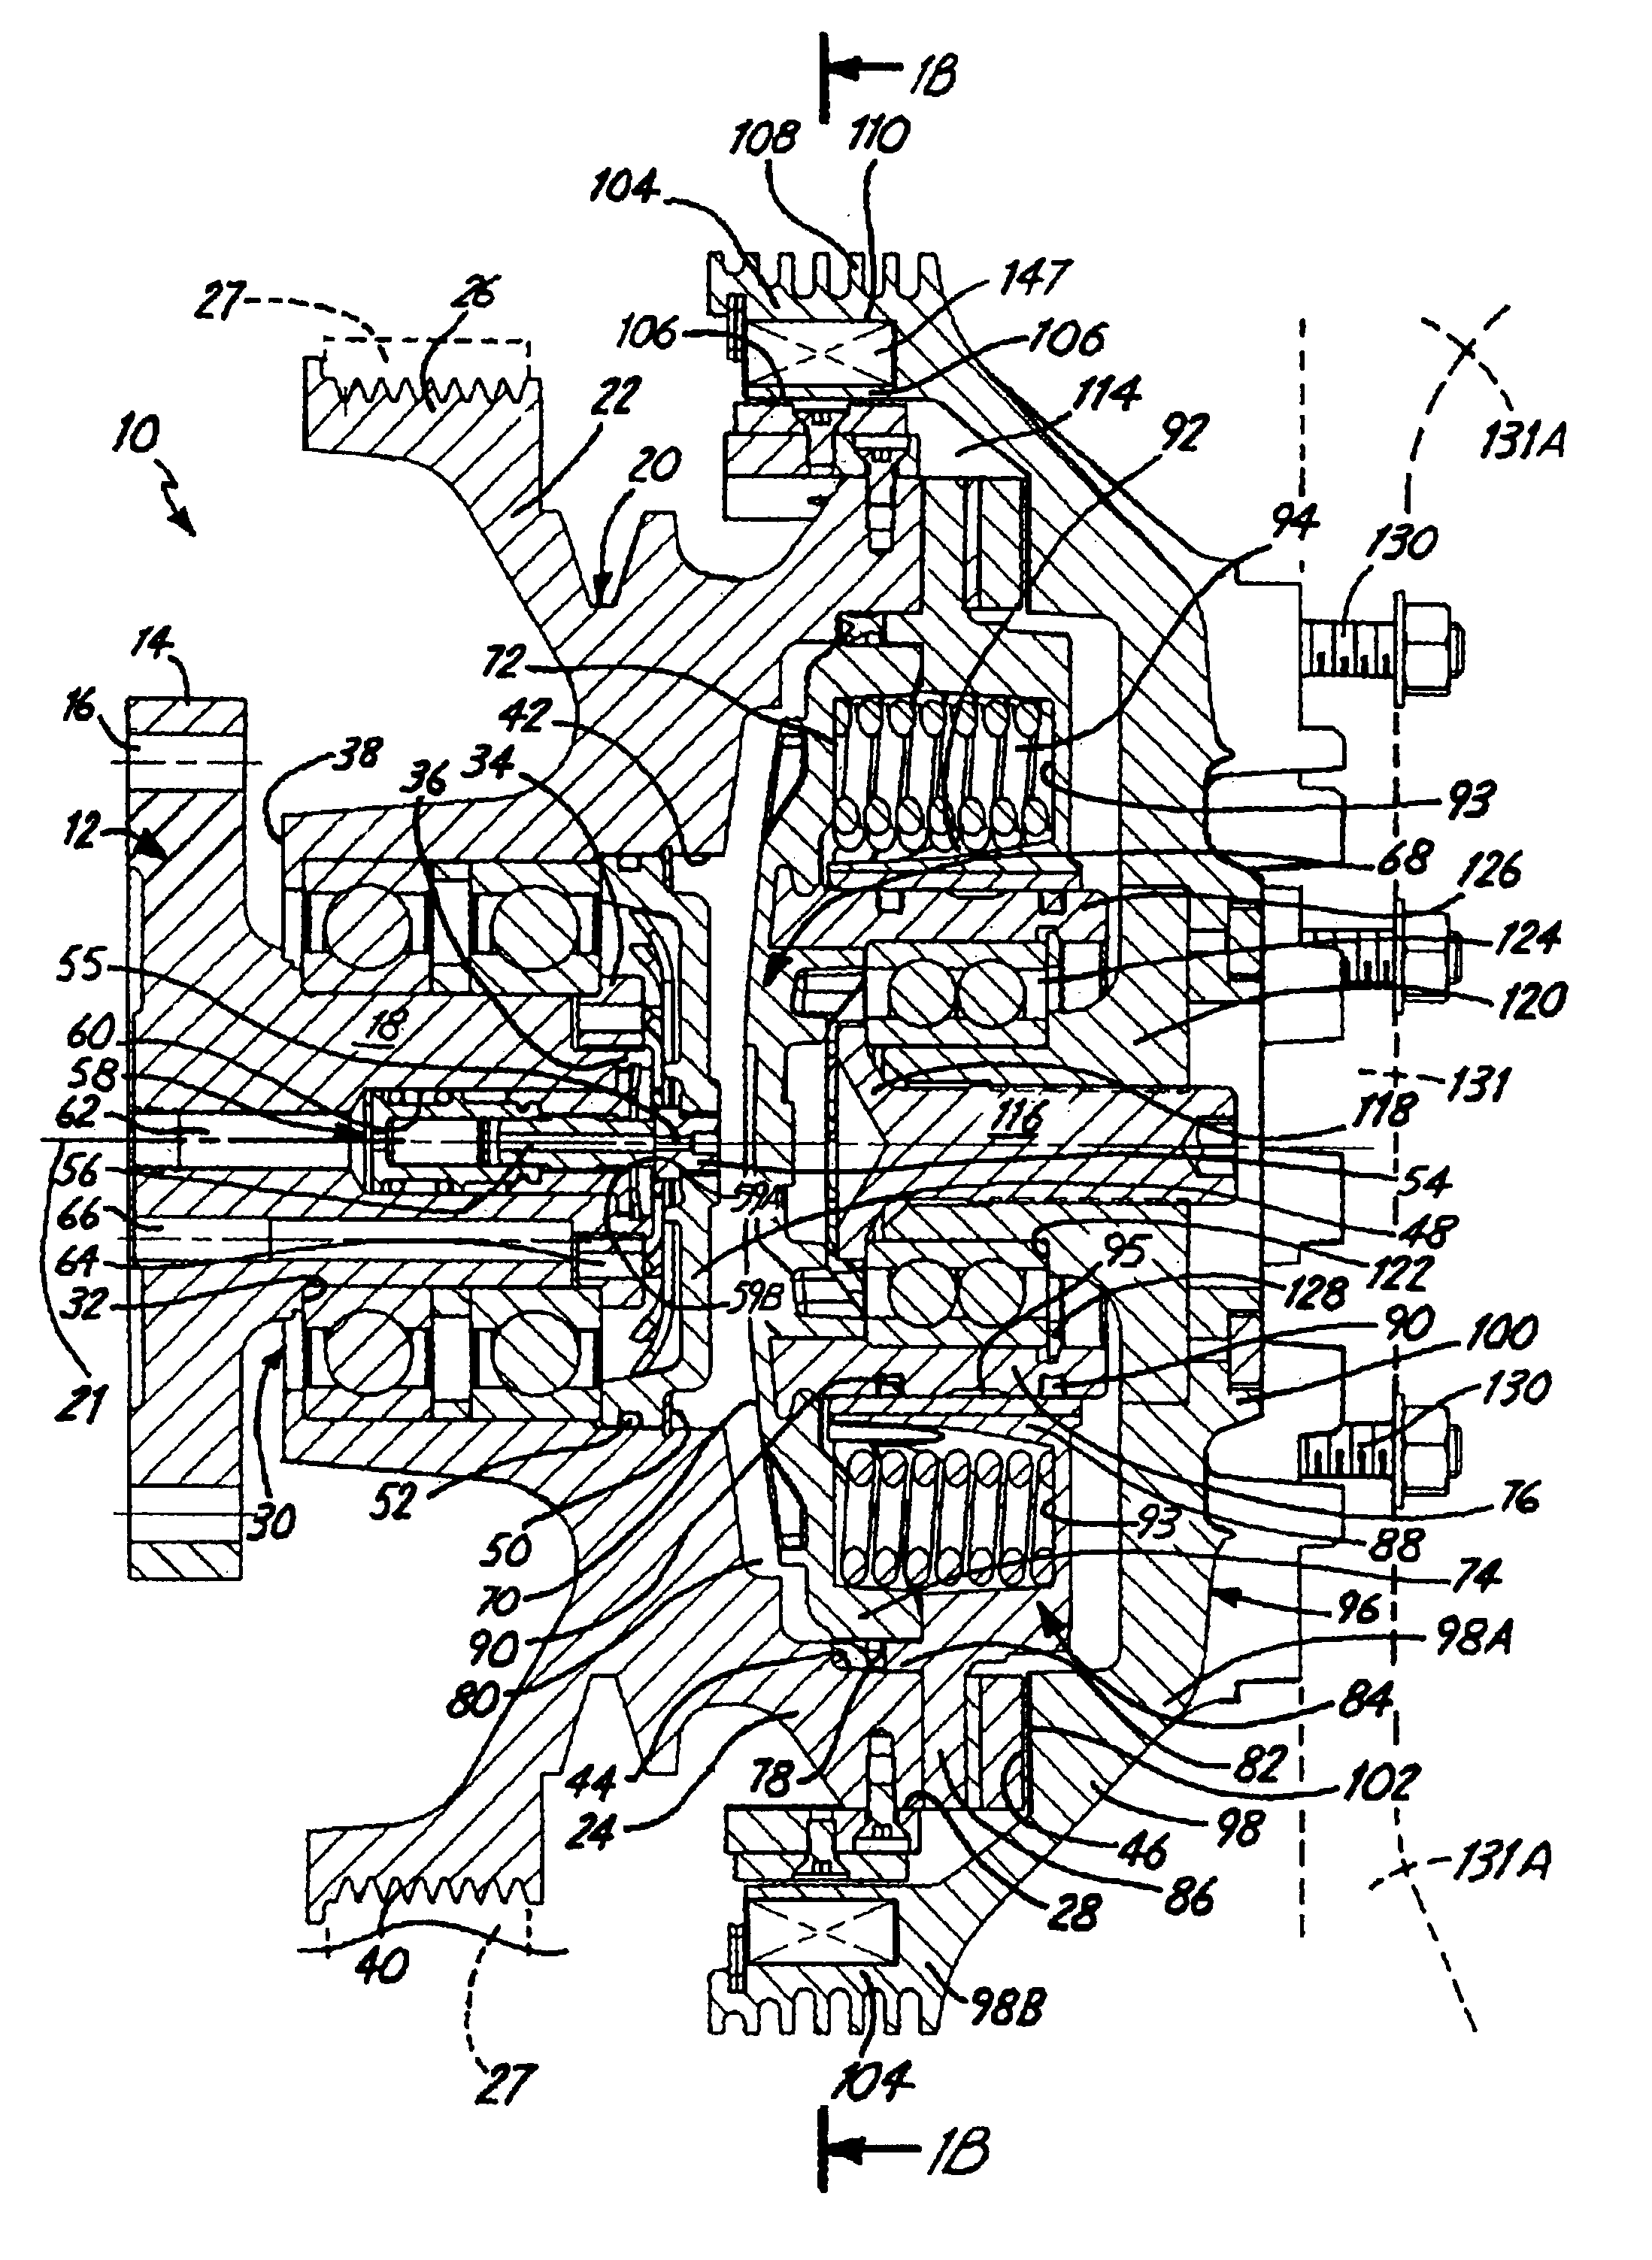 Two-speed rotational control apparatus with eddy current drive